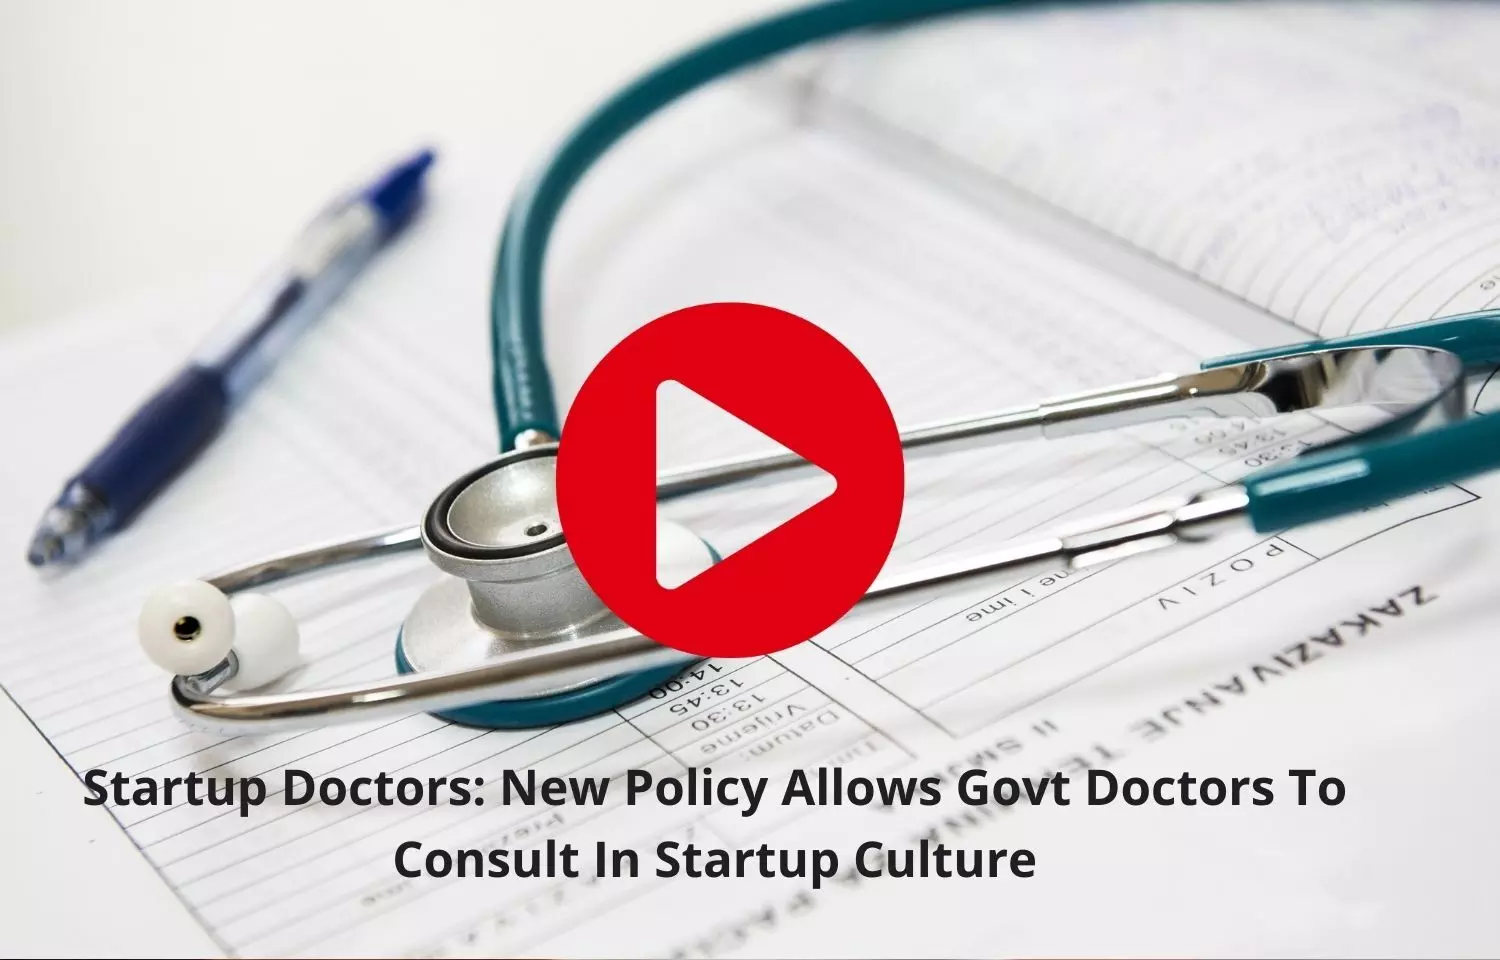 Startup doctors: New policy allows govt doctors to consult in startup culture